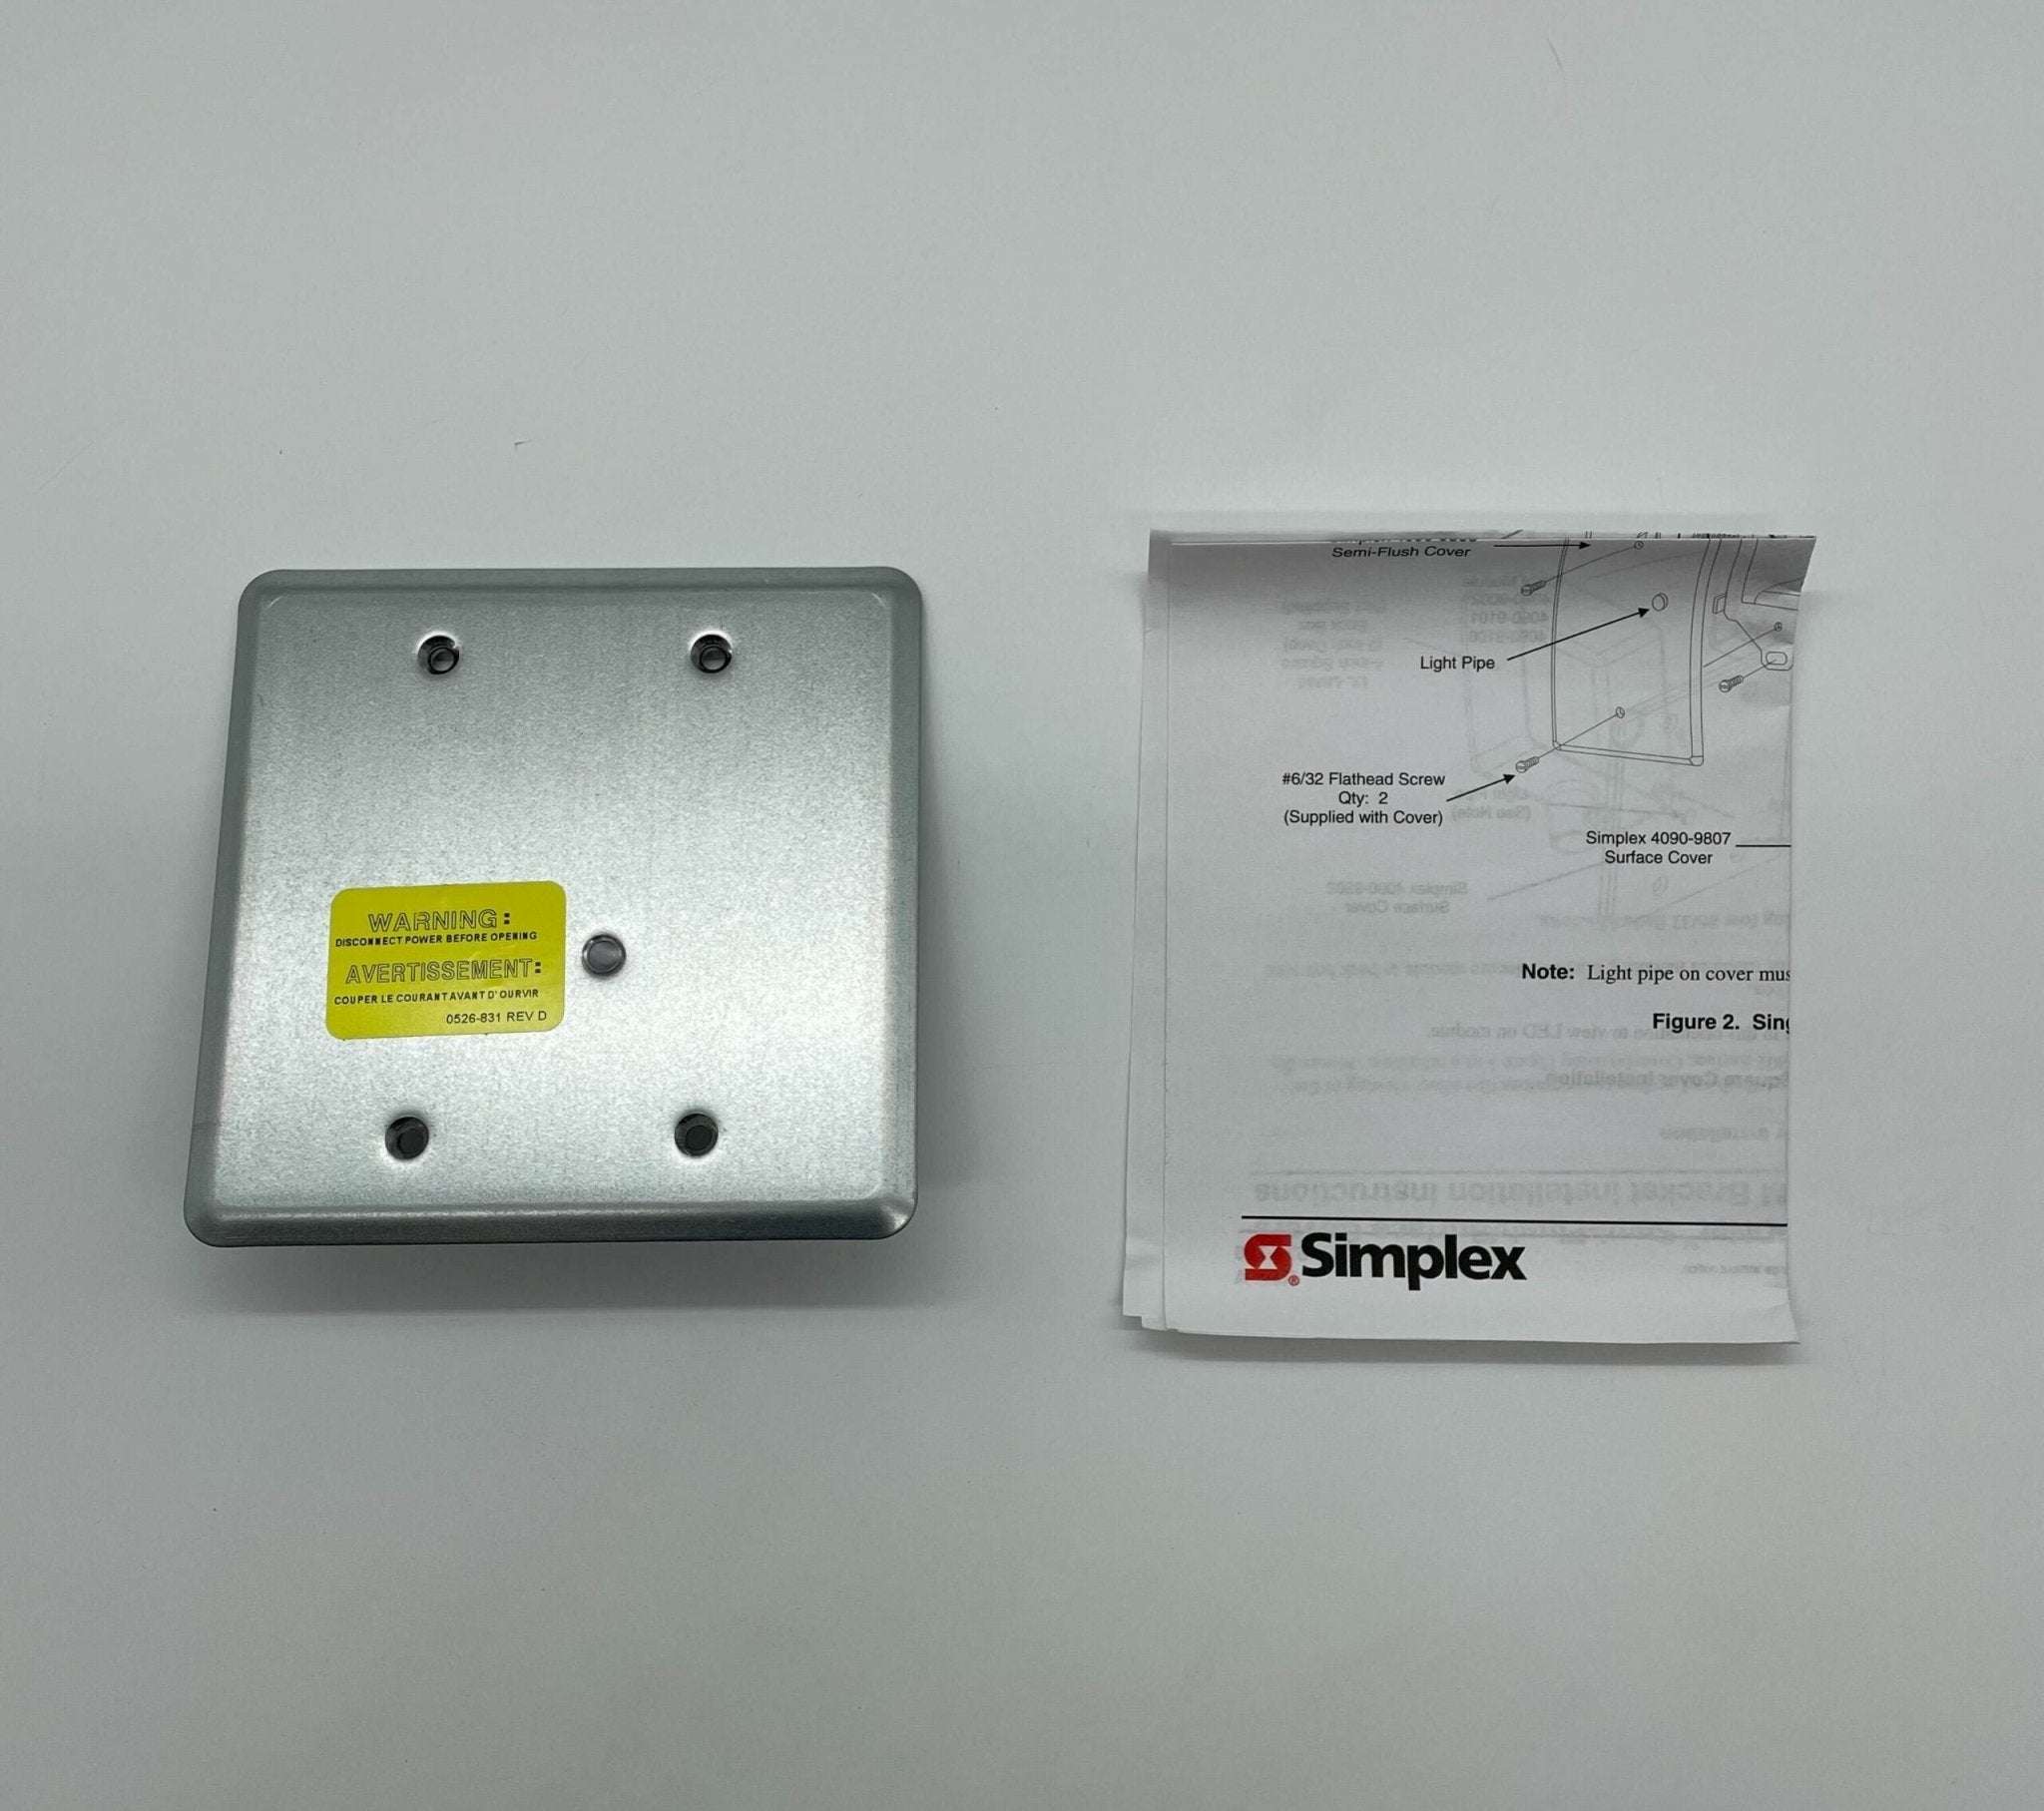 Simplex 4090-9801 Cover Plate - The Fire Alarm Supplier